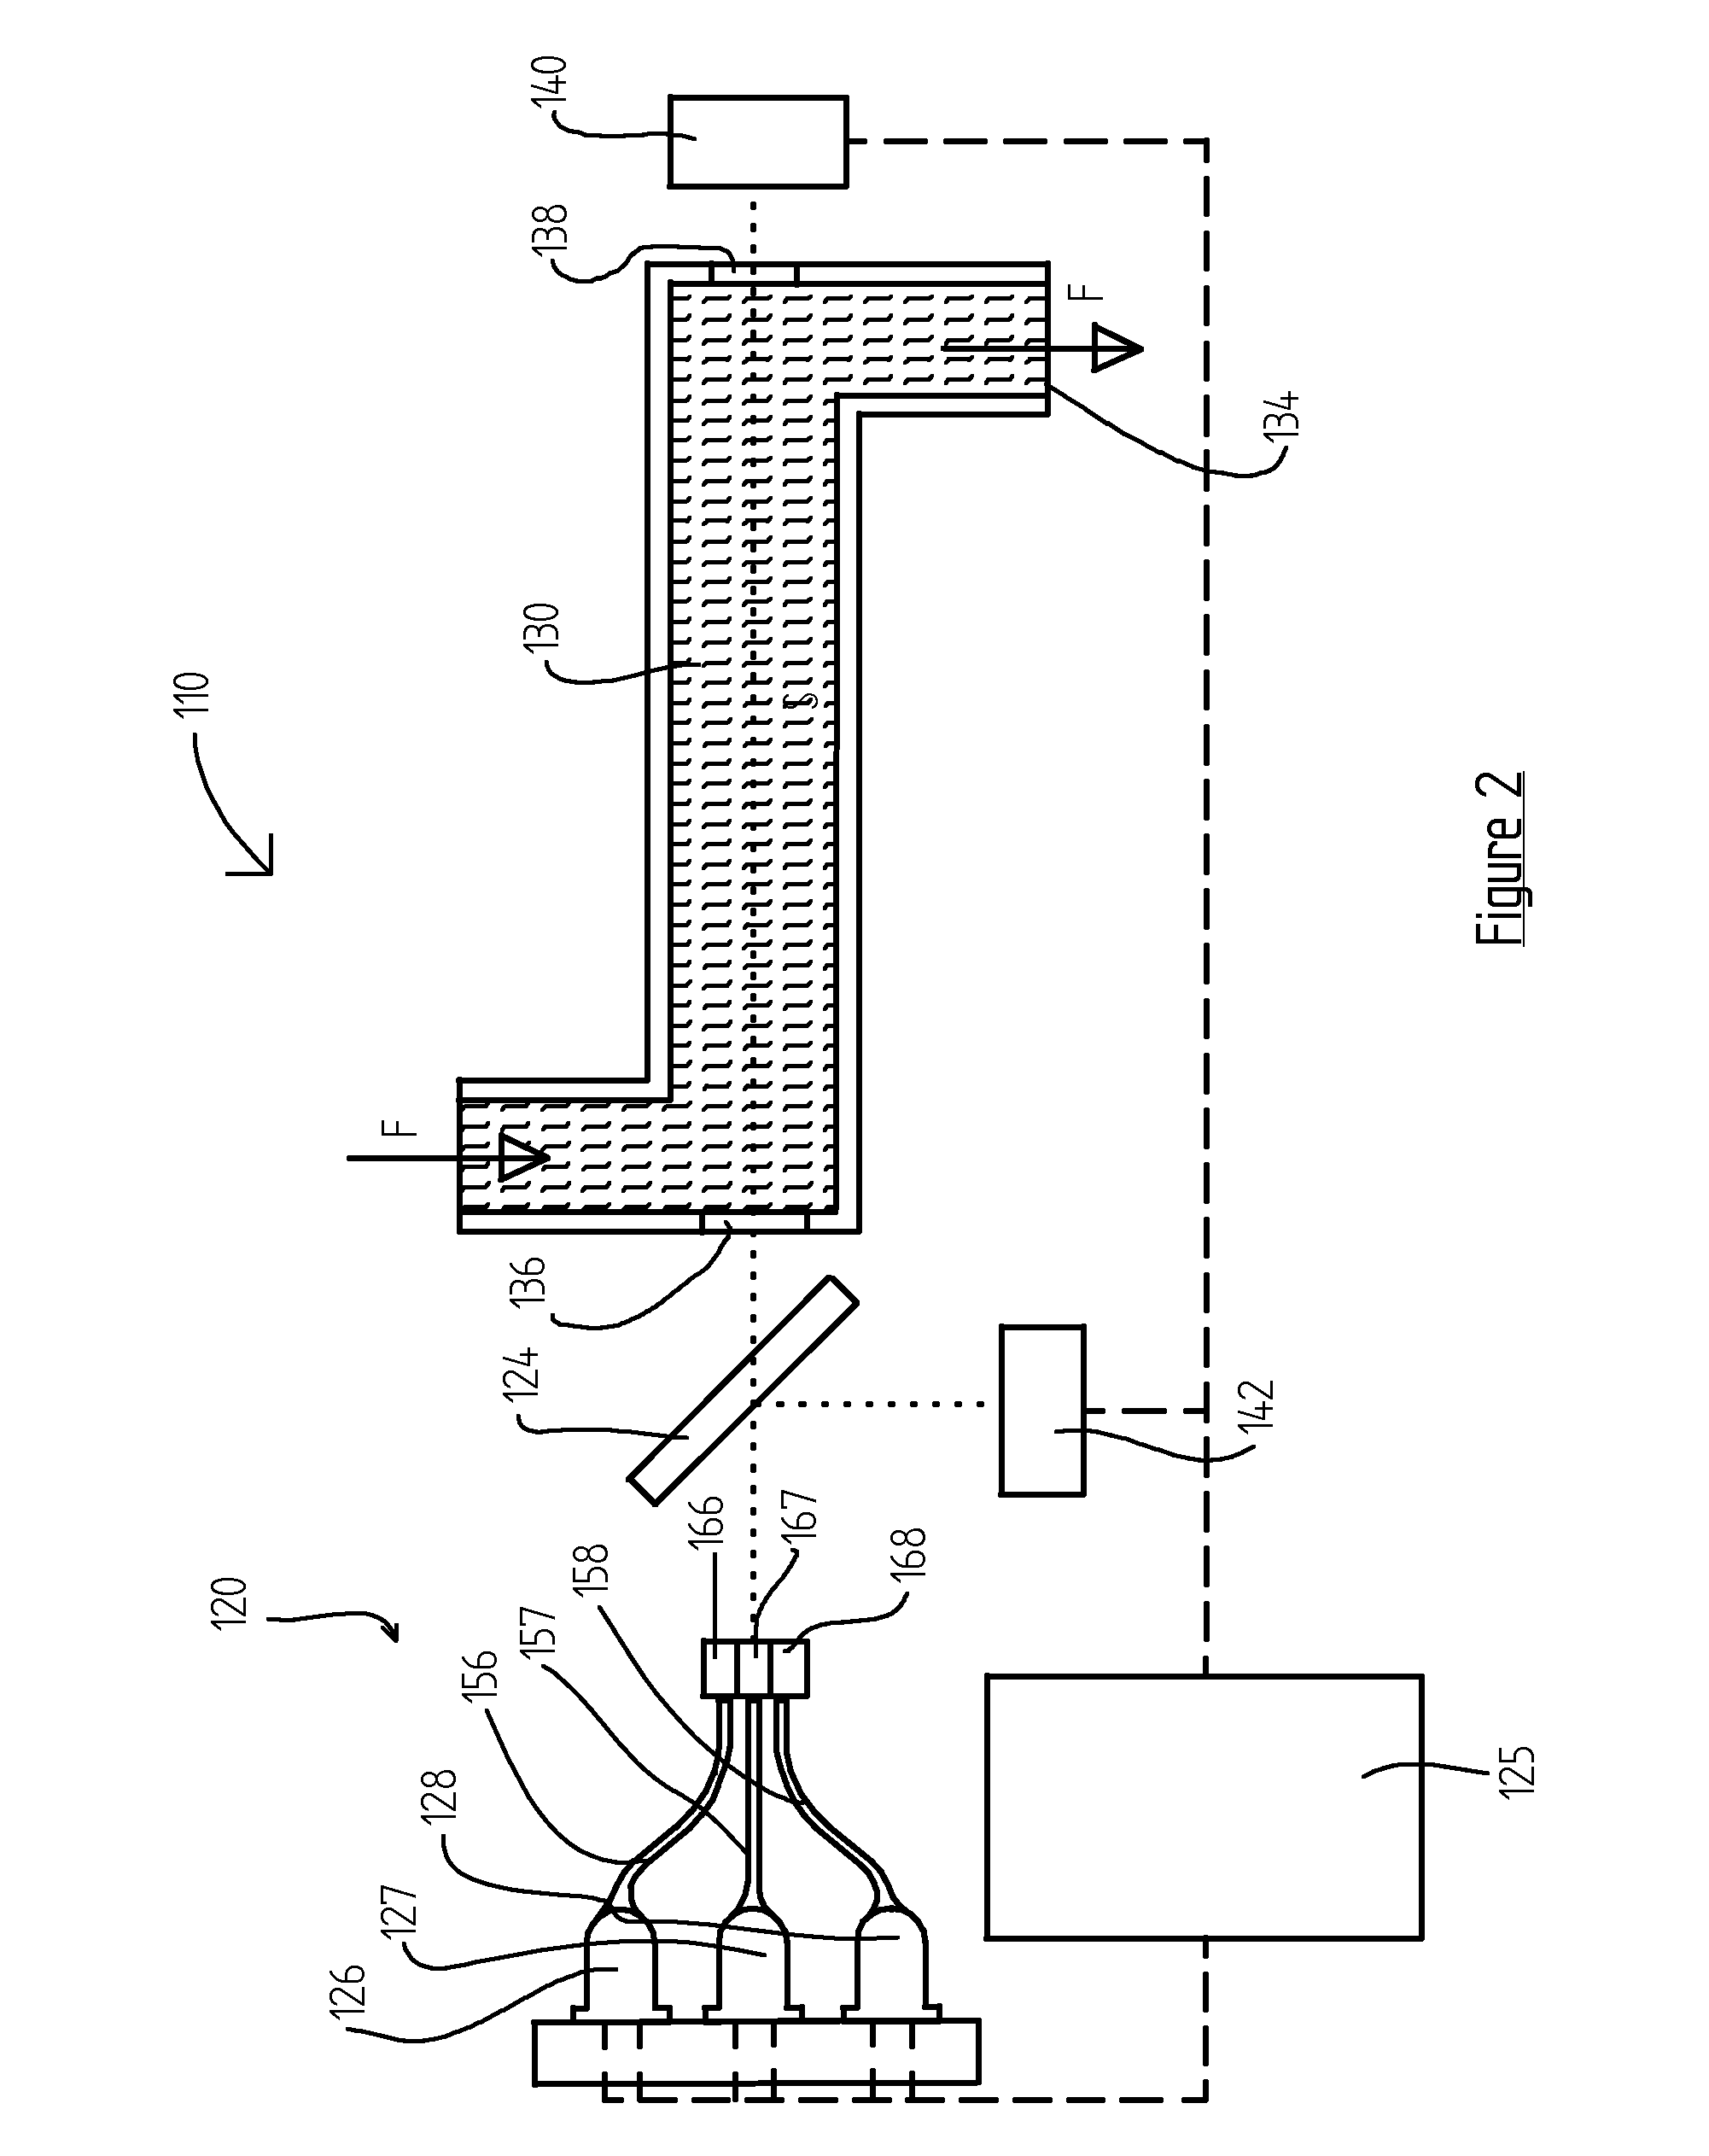 Methods and apparatus for measuring the light absorbance of a substance in a solution